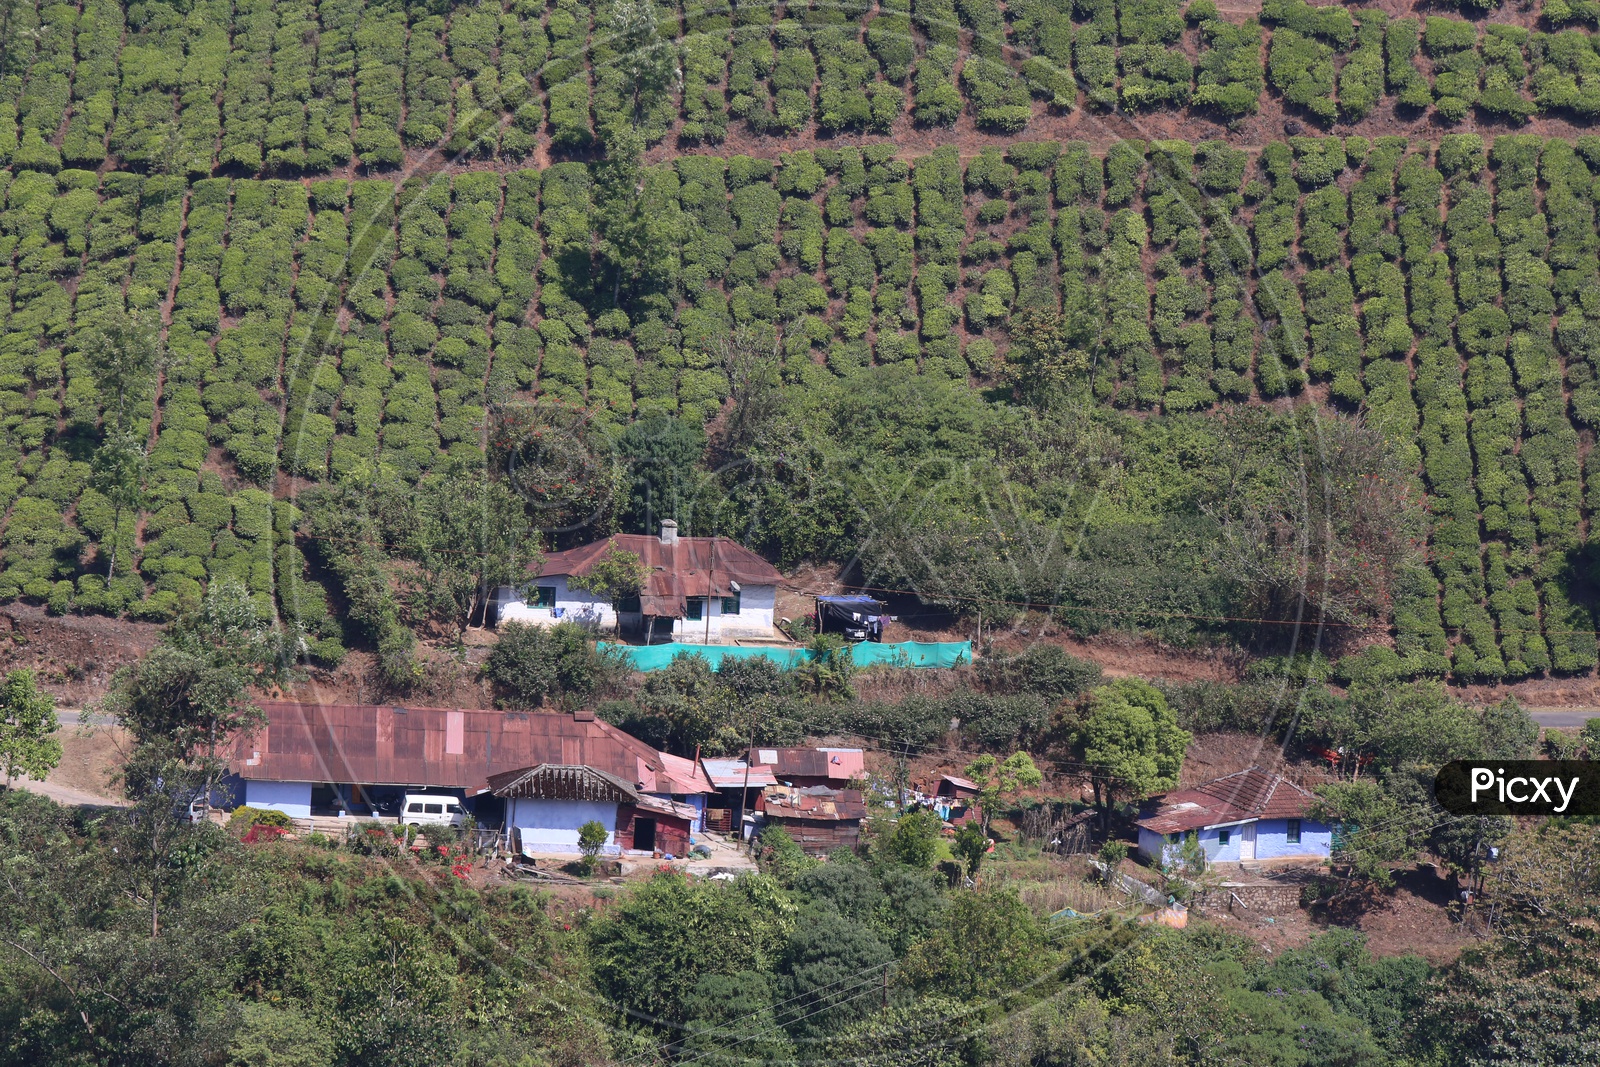 A Beautiful Composition Shot Of houses In Munnar between The Tea Plantations